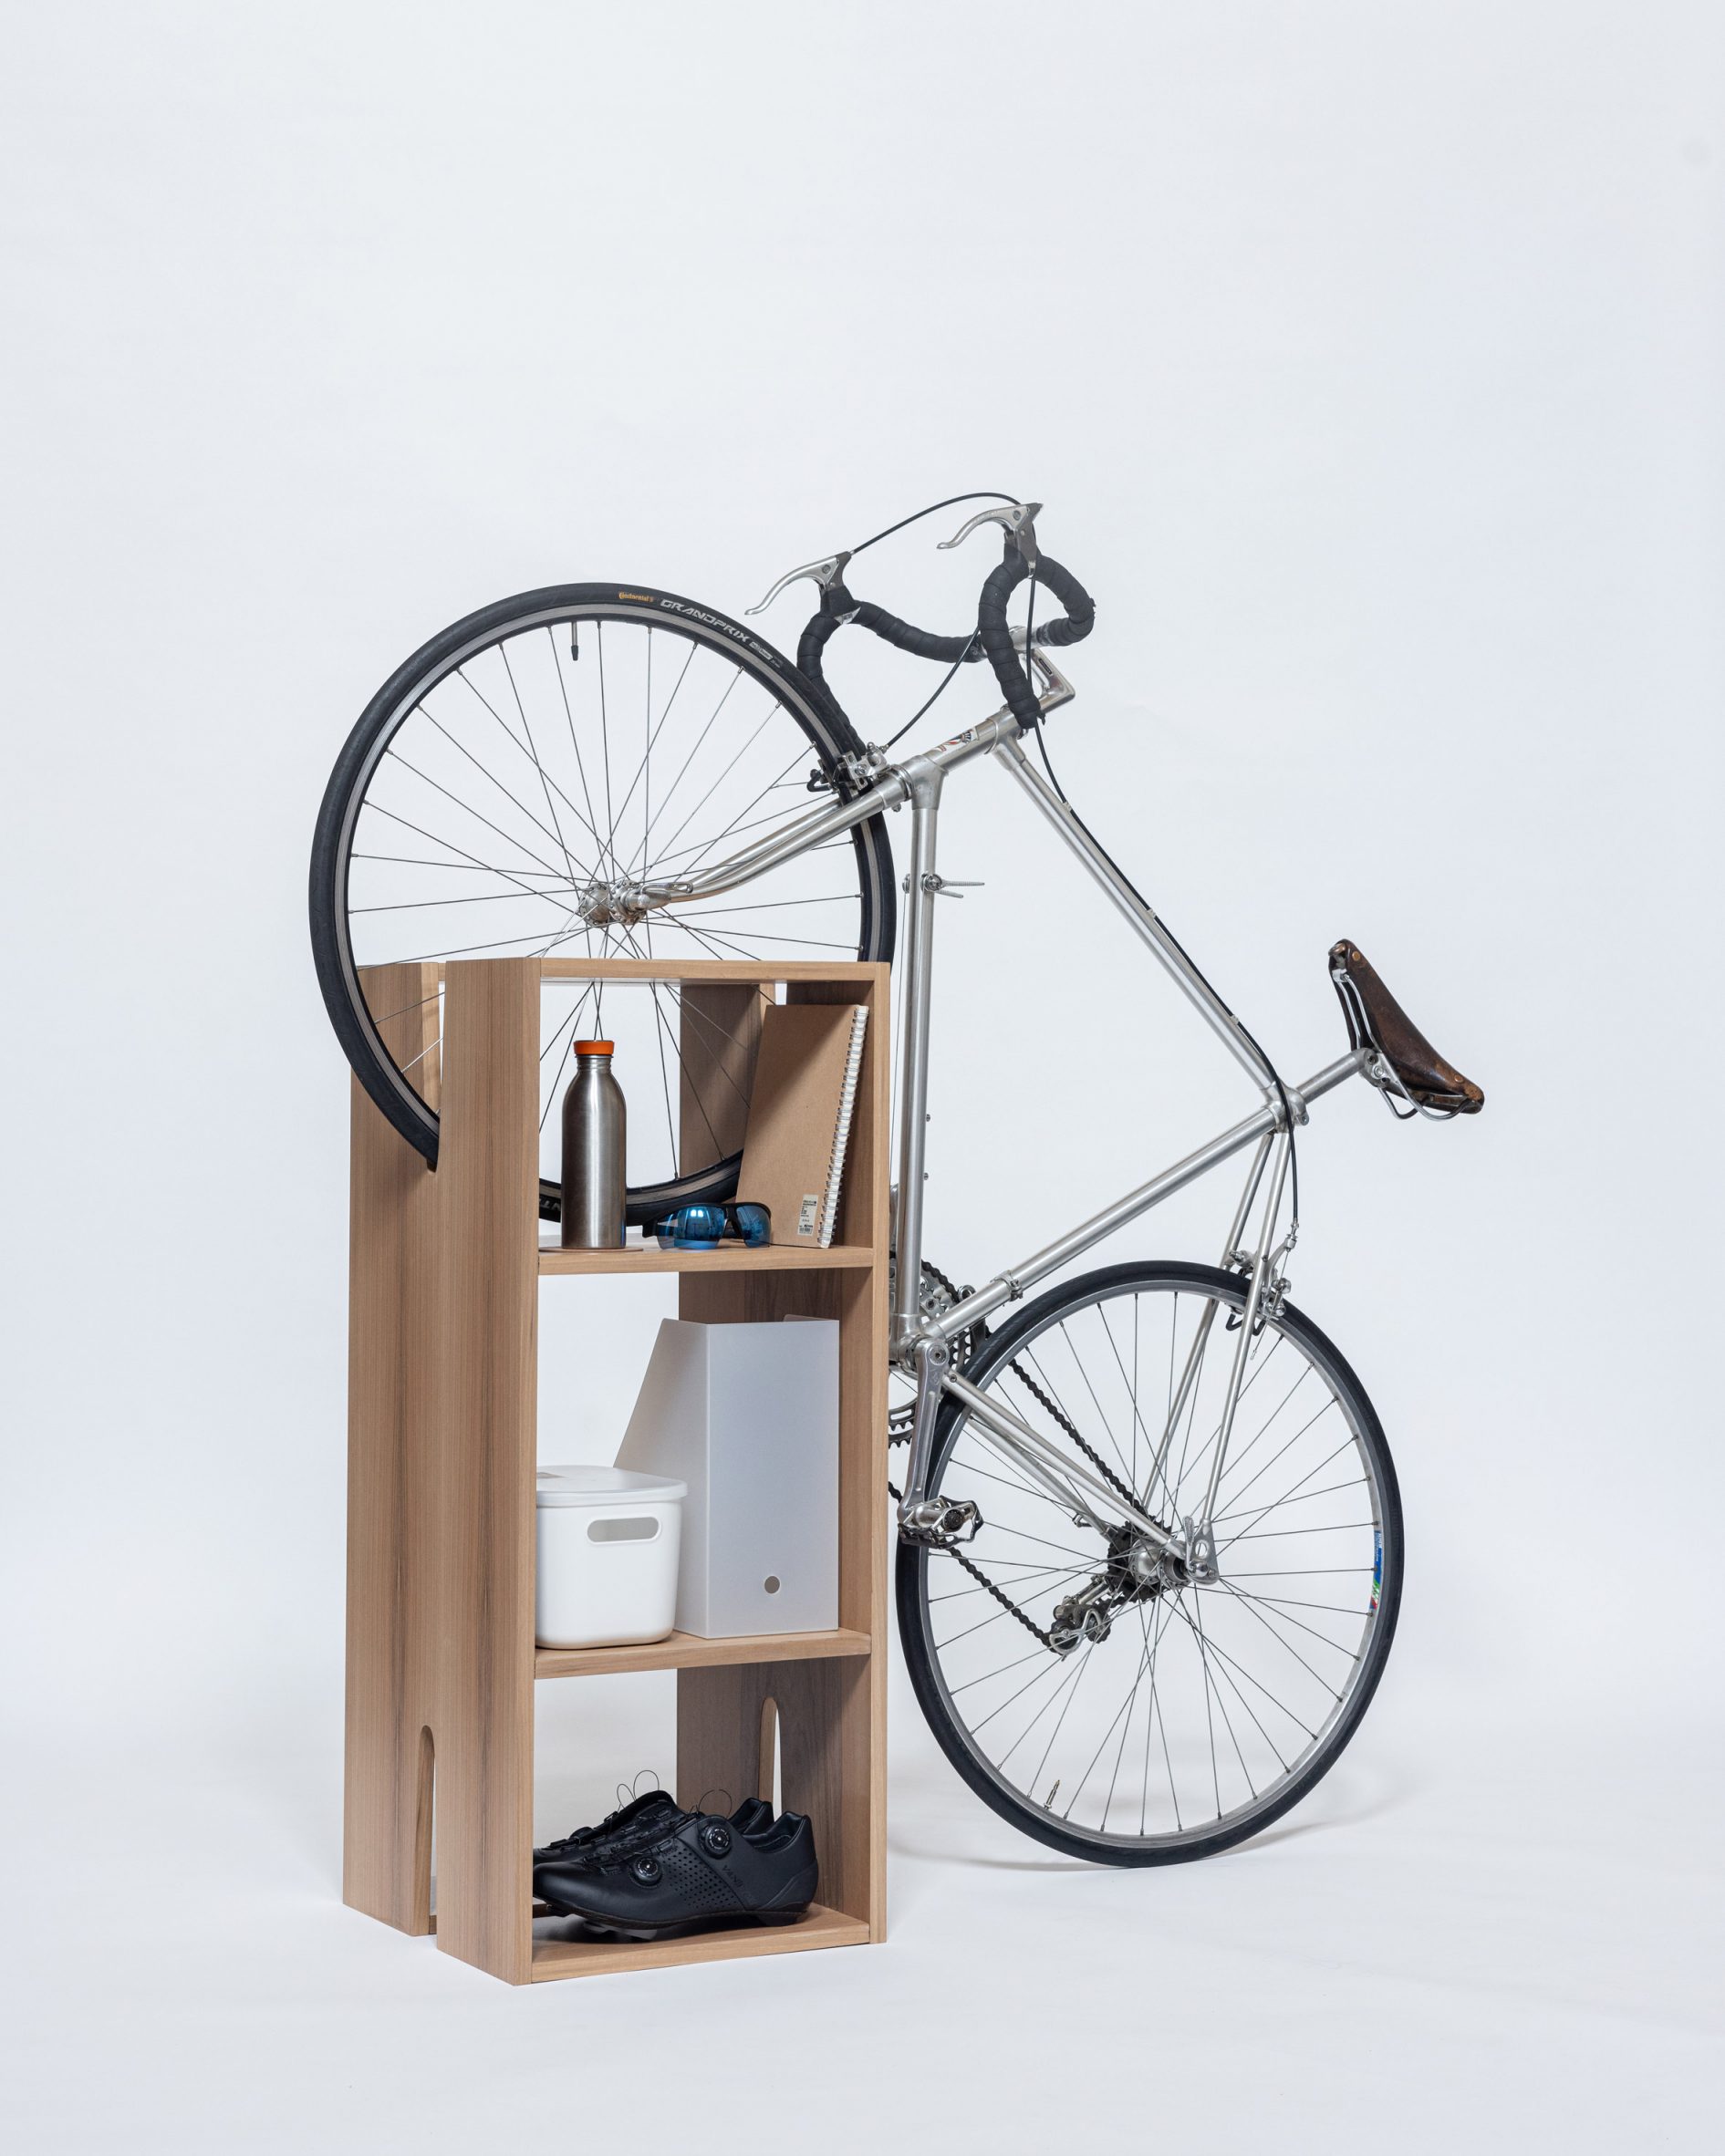 A wooden book shelf with a slot for keeping a bike in